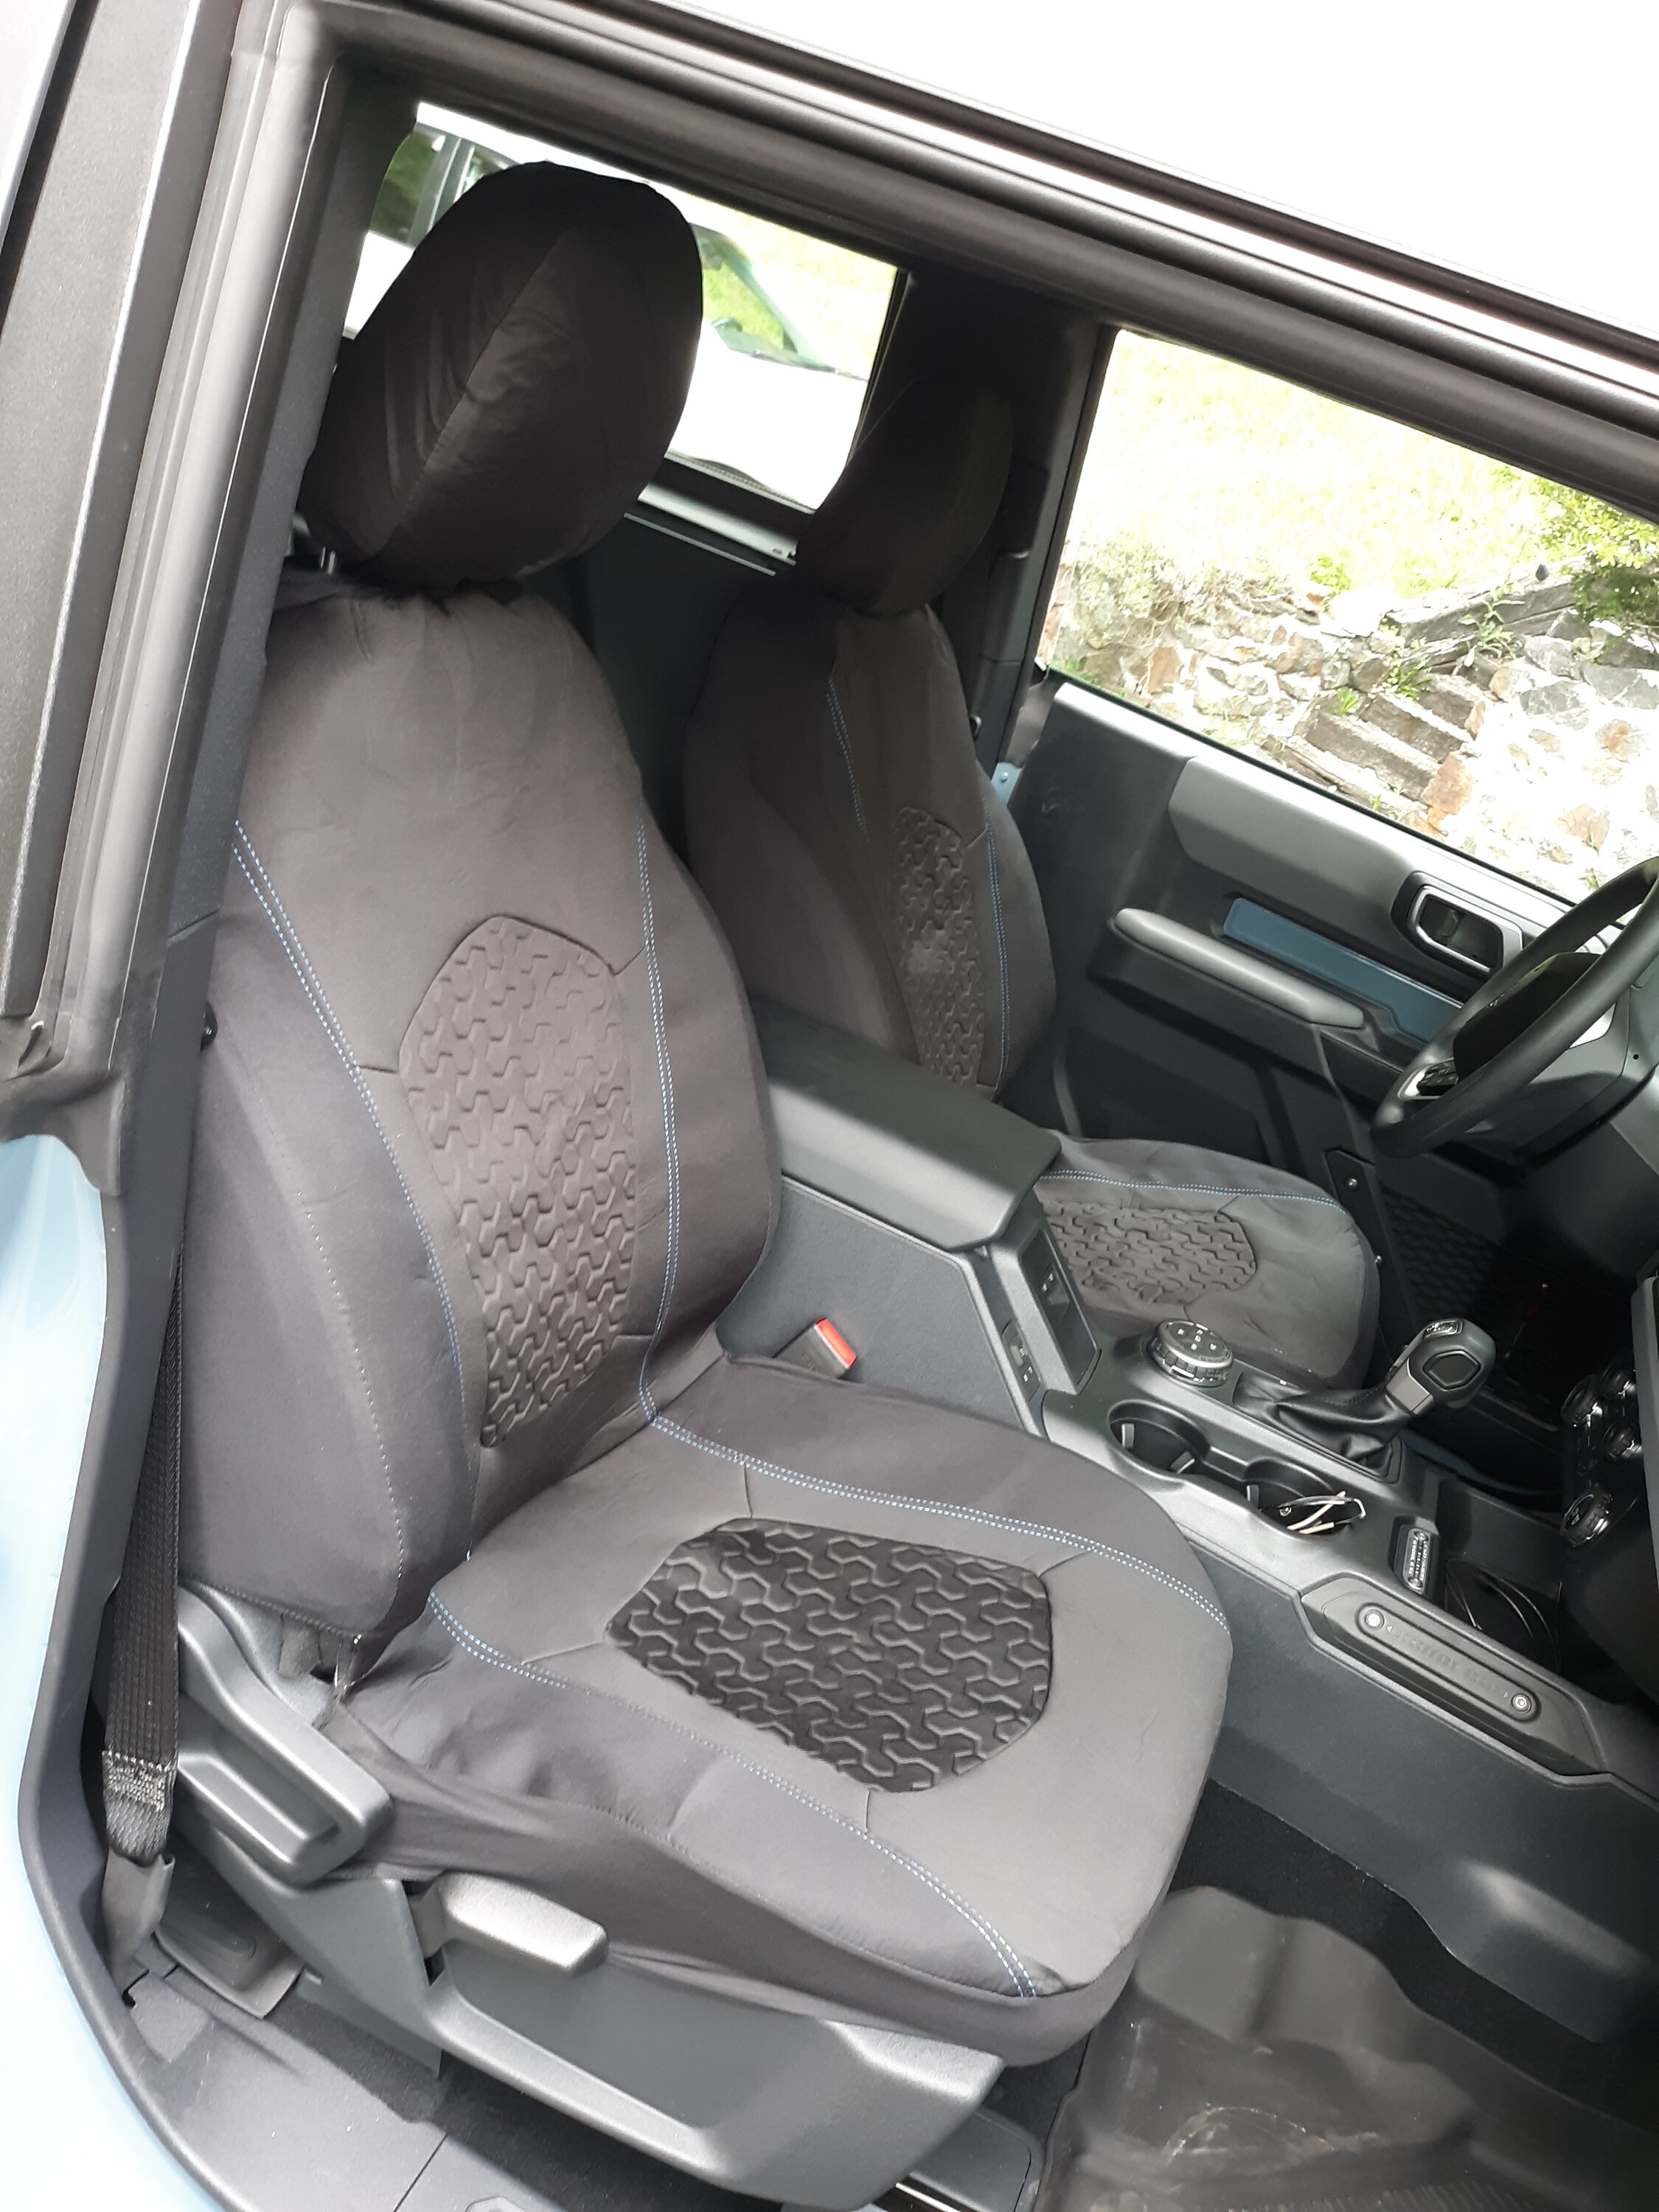 Ford Bronco Help with 2 door seat covers? seat